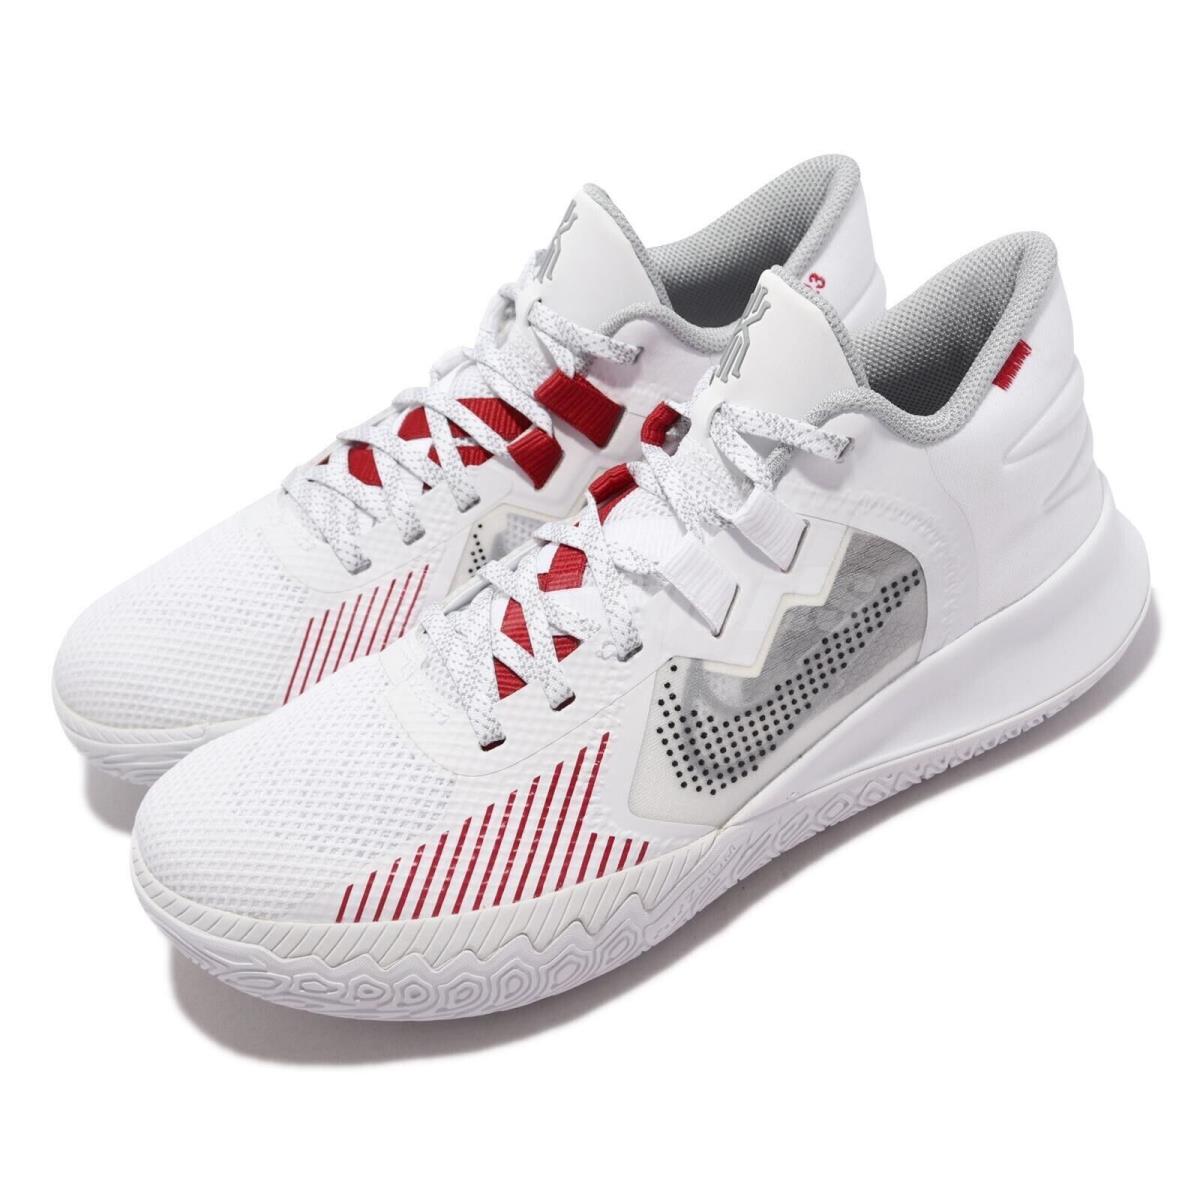 Nike Kyrie Flytrap V 5 White Red Mens Size 9.5 12 13 Basketball Shoes CZ4100-100 - White/ Red , white/ red Manufacturer